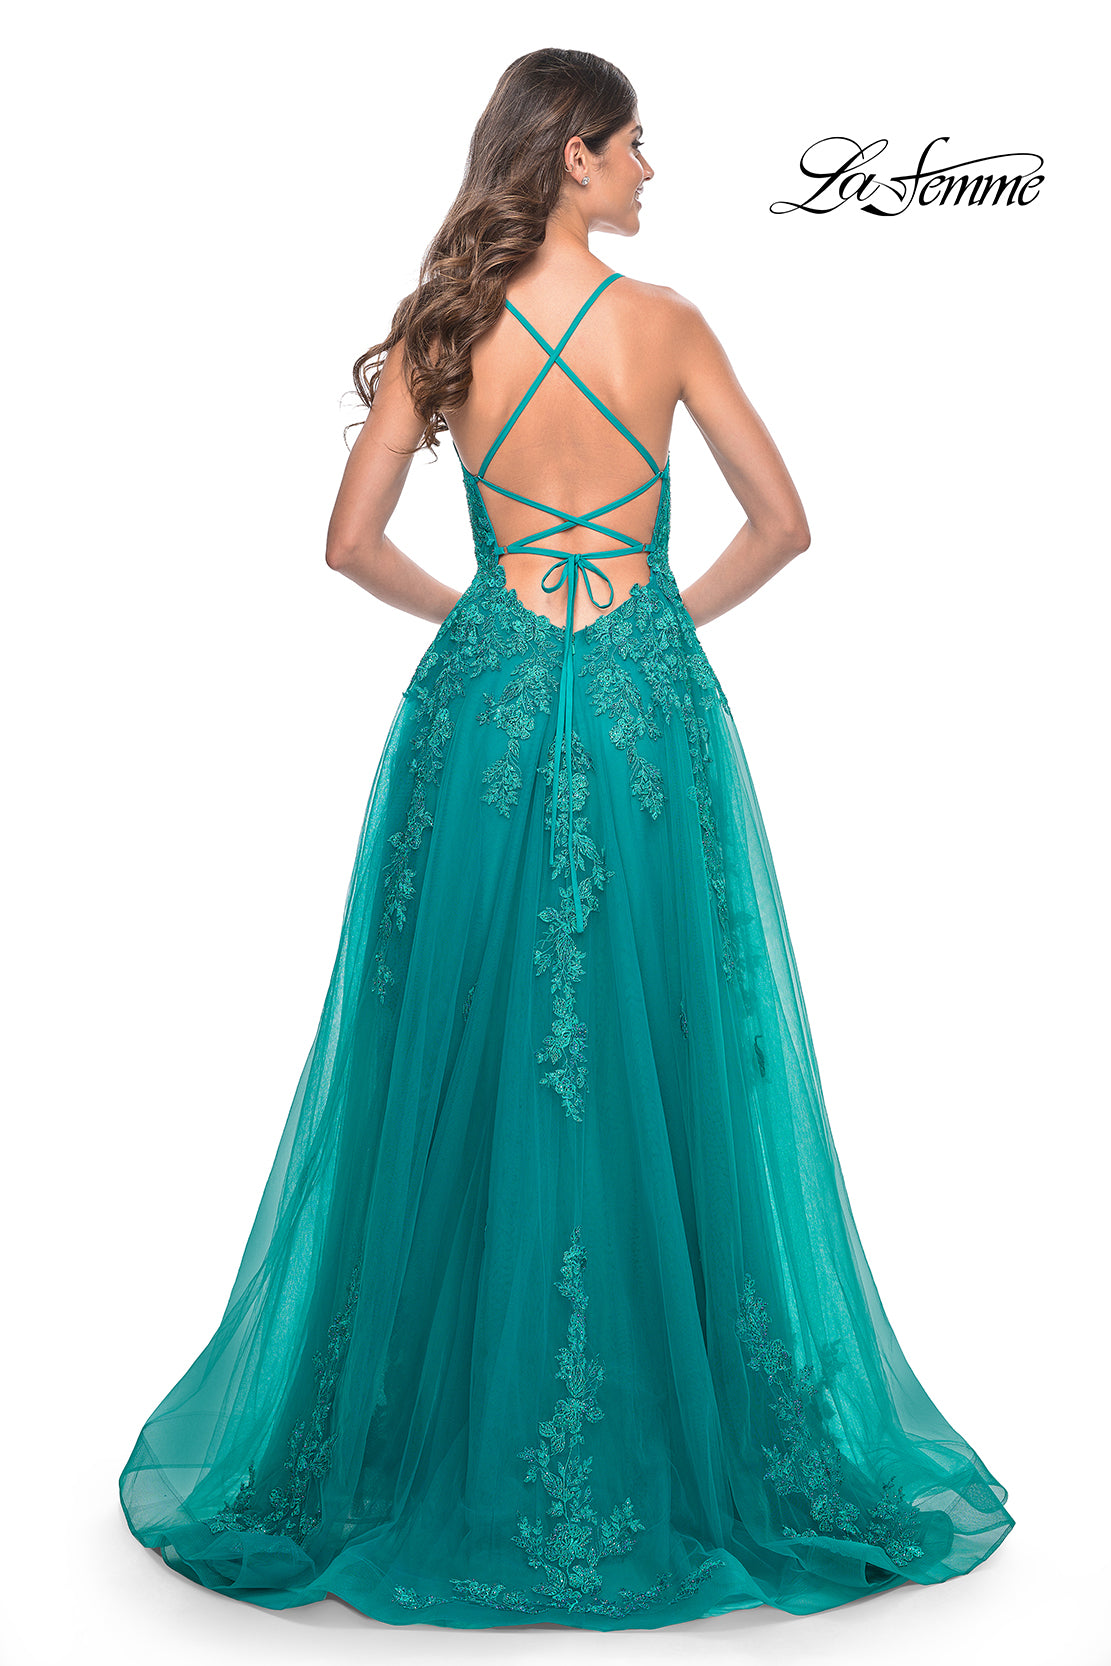 Strappy Back Beaded Lace Applique Gown